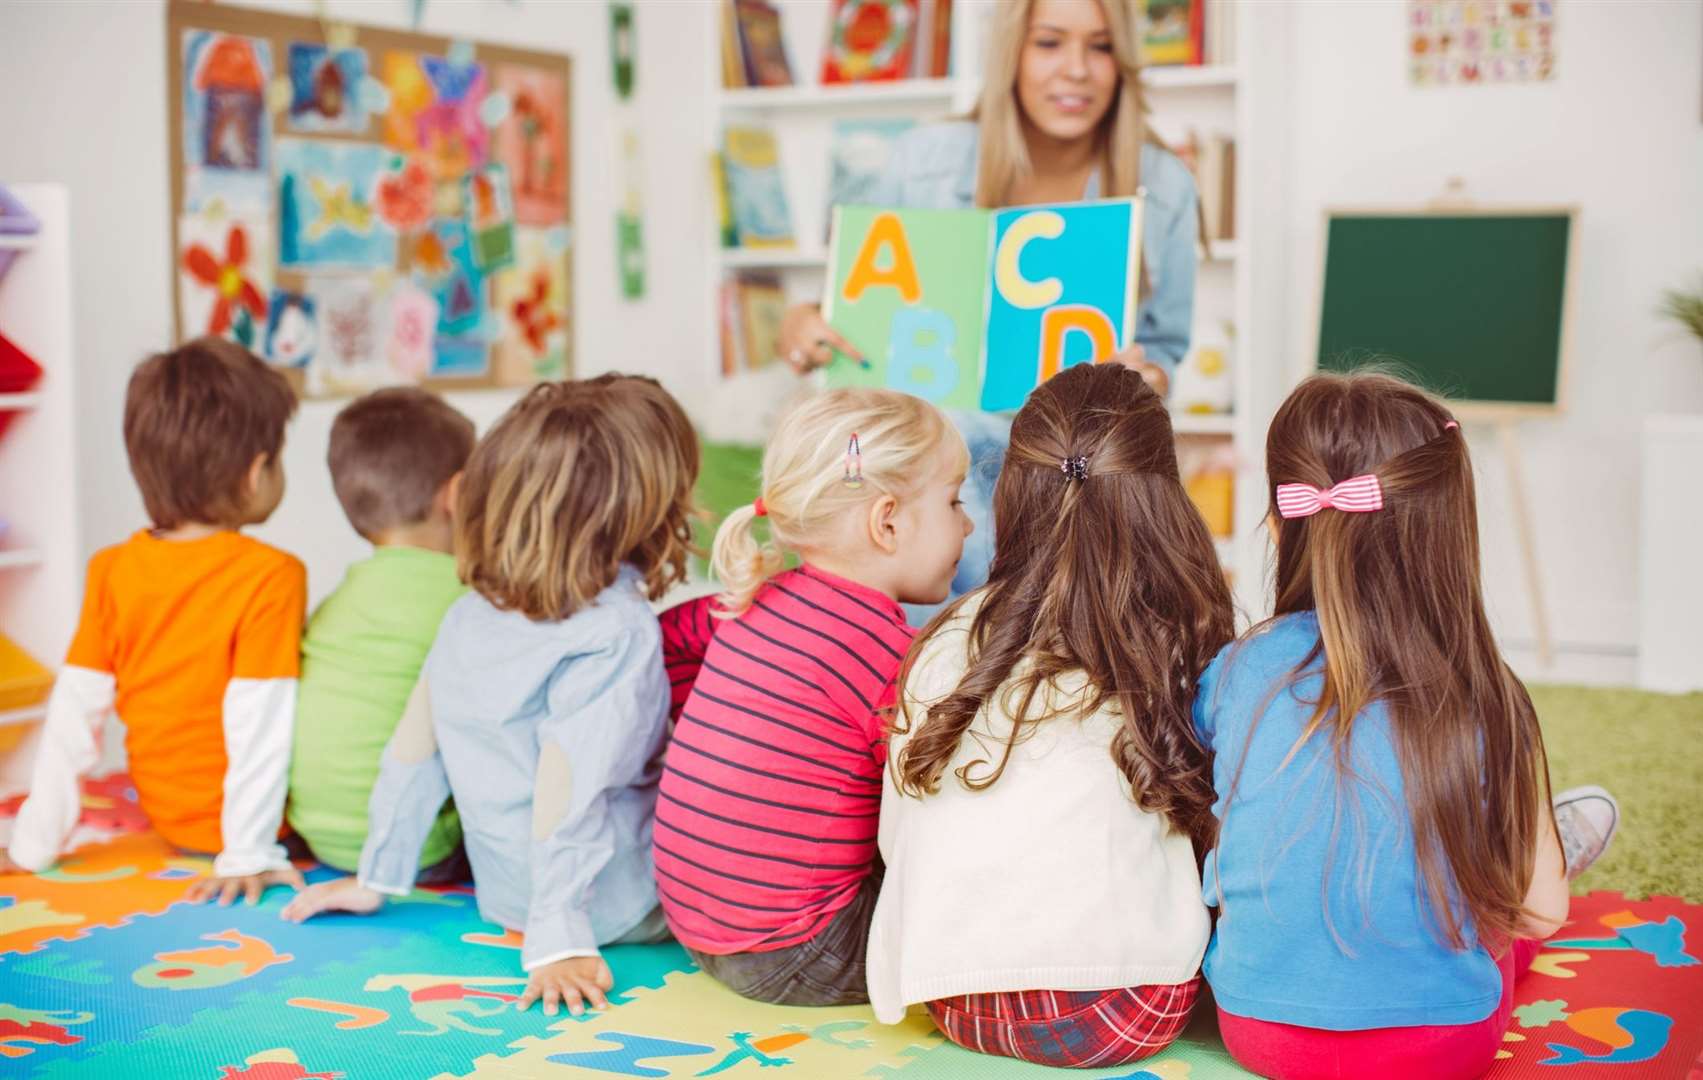 Ofsted criticised the nursery’s curriculum and said that staff were not doing enough to engage with children or keep them safe. Photo: stock